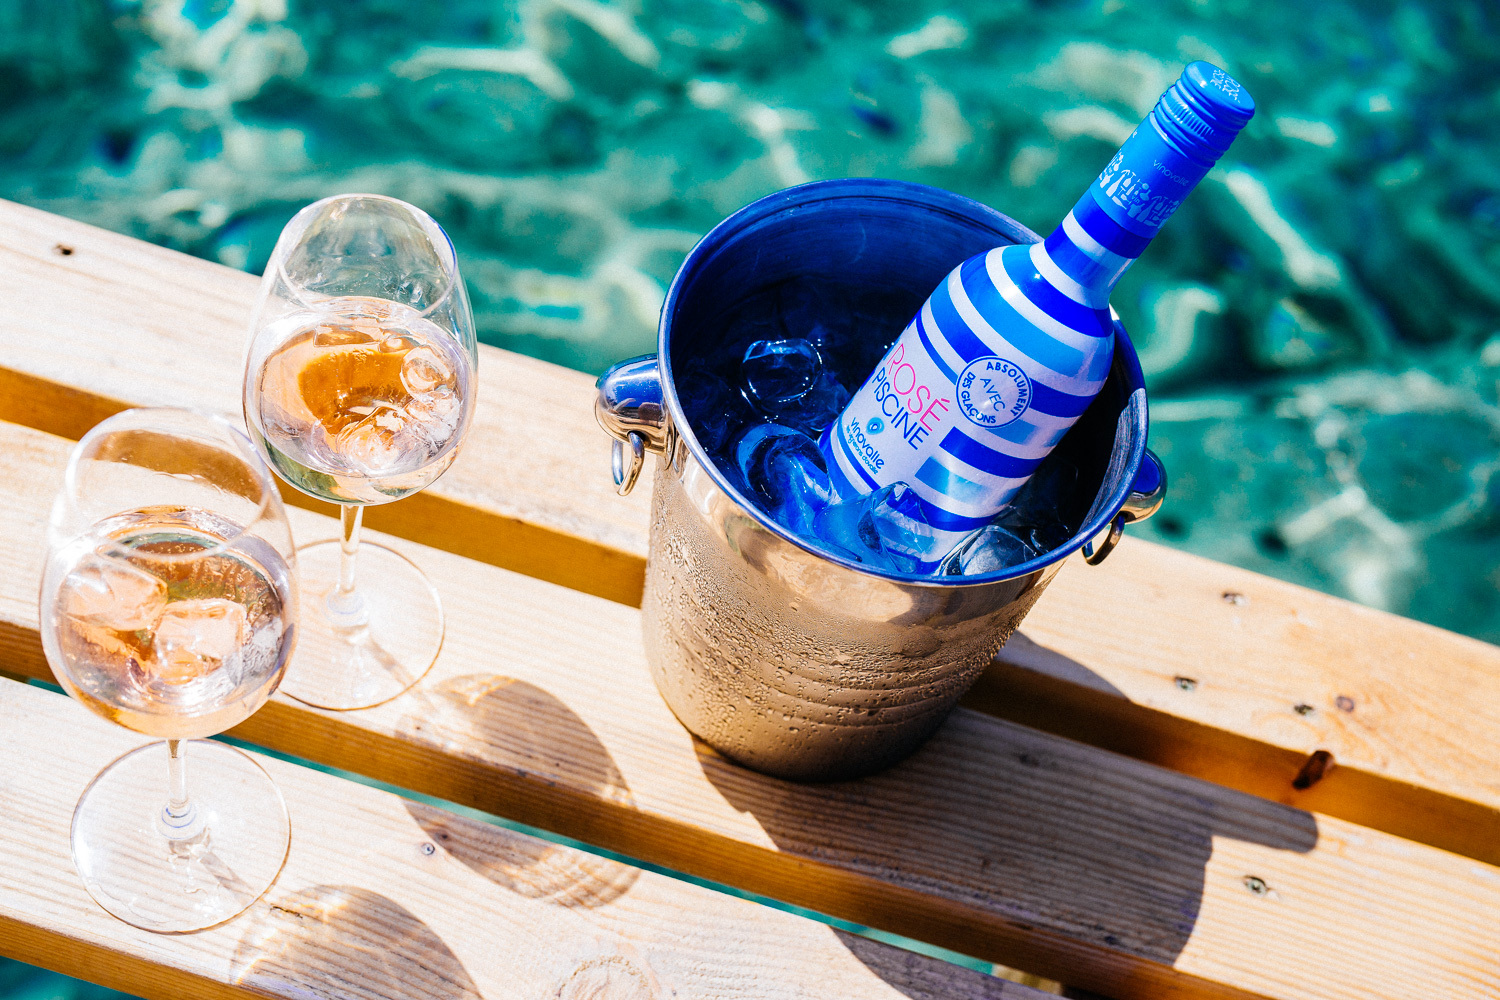 Blue and white striped bottle of Rosé Piscine in an ice bucket, next to two glasses of rosé, by blue-green water